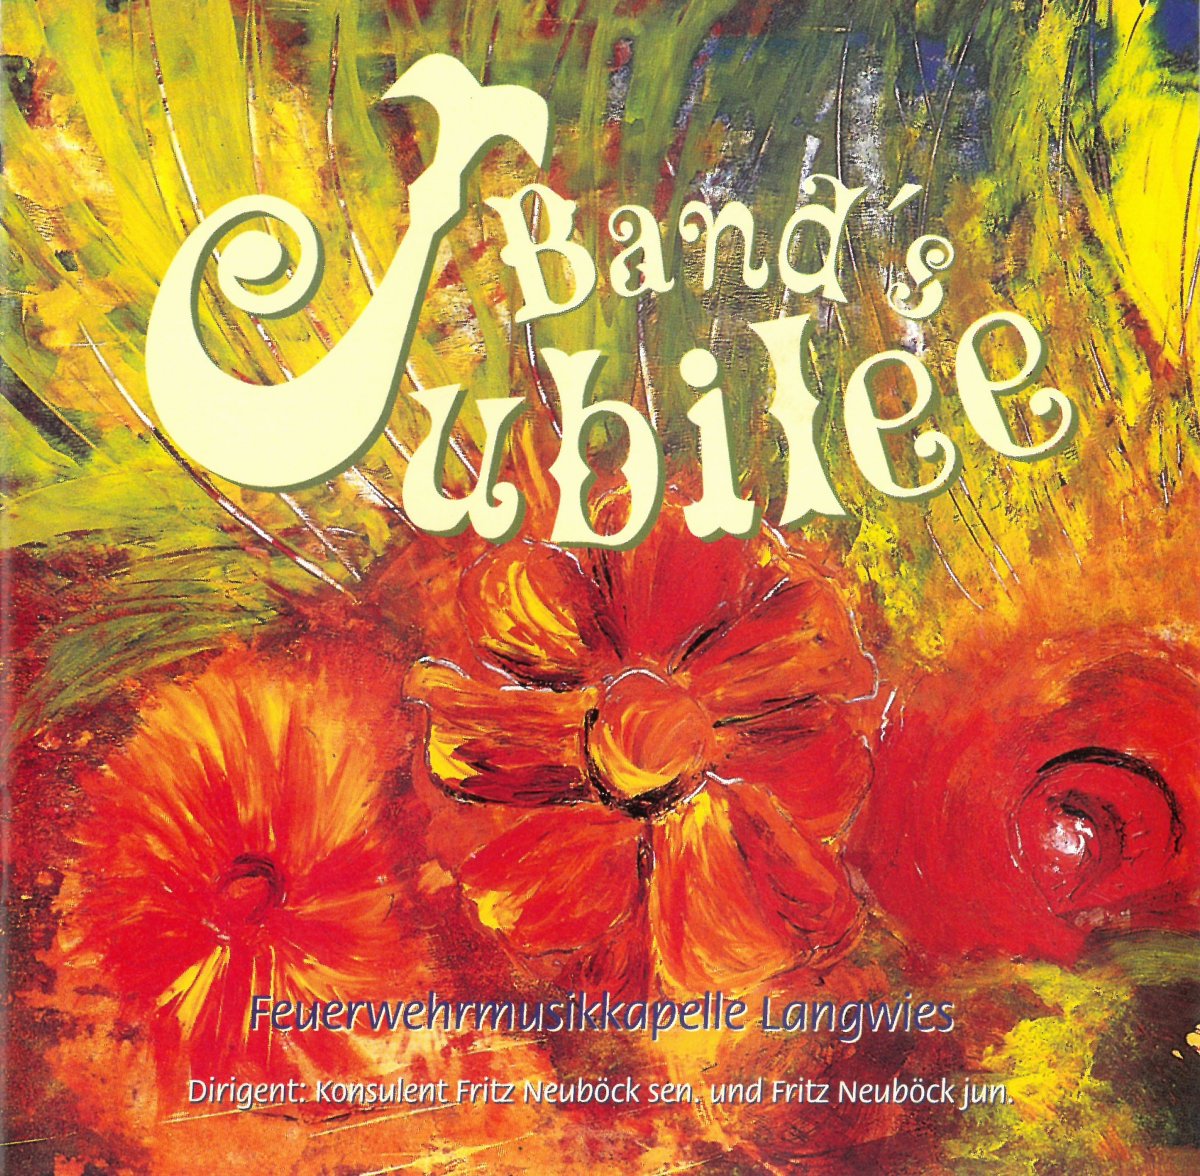 Band's Jubilee - cliquer ici